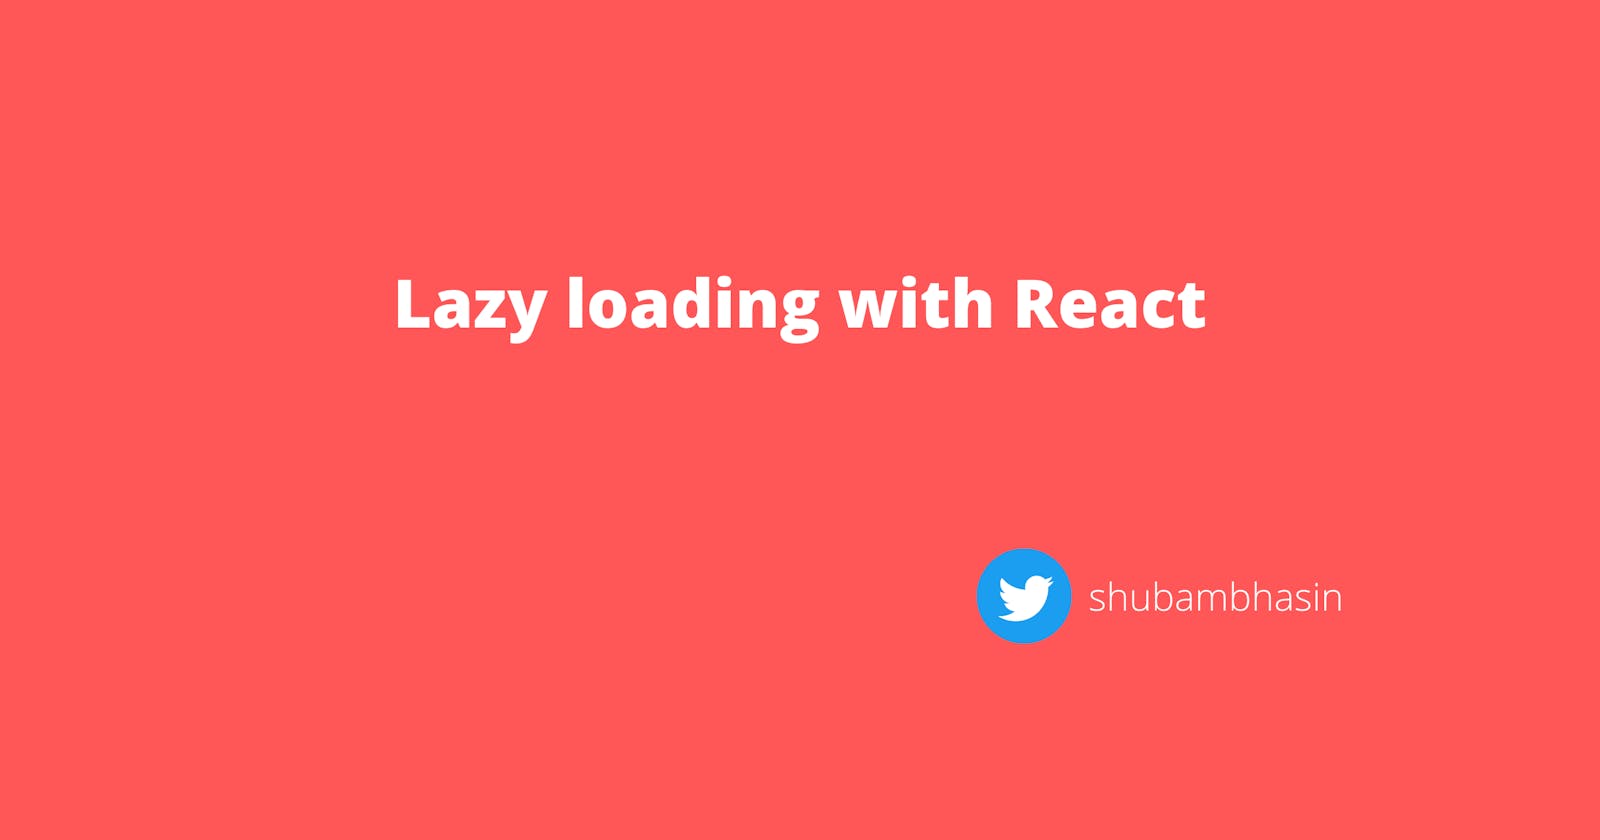 Lazy loading with React